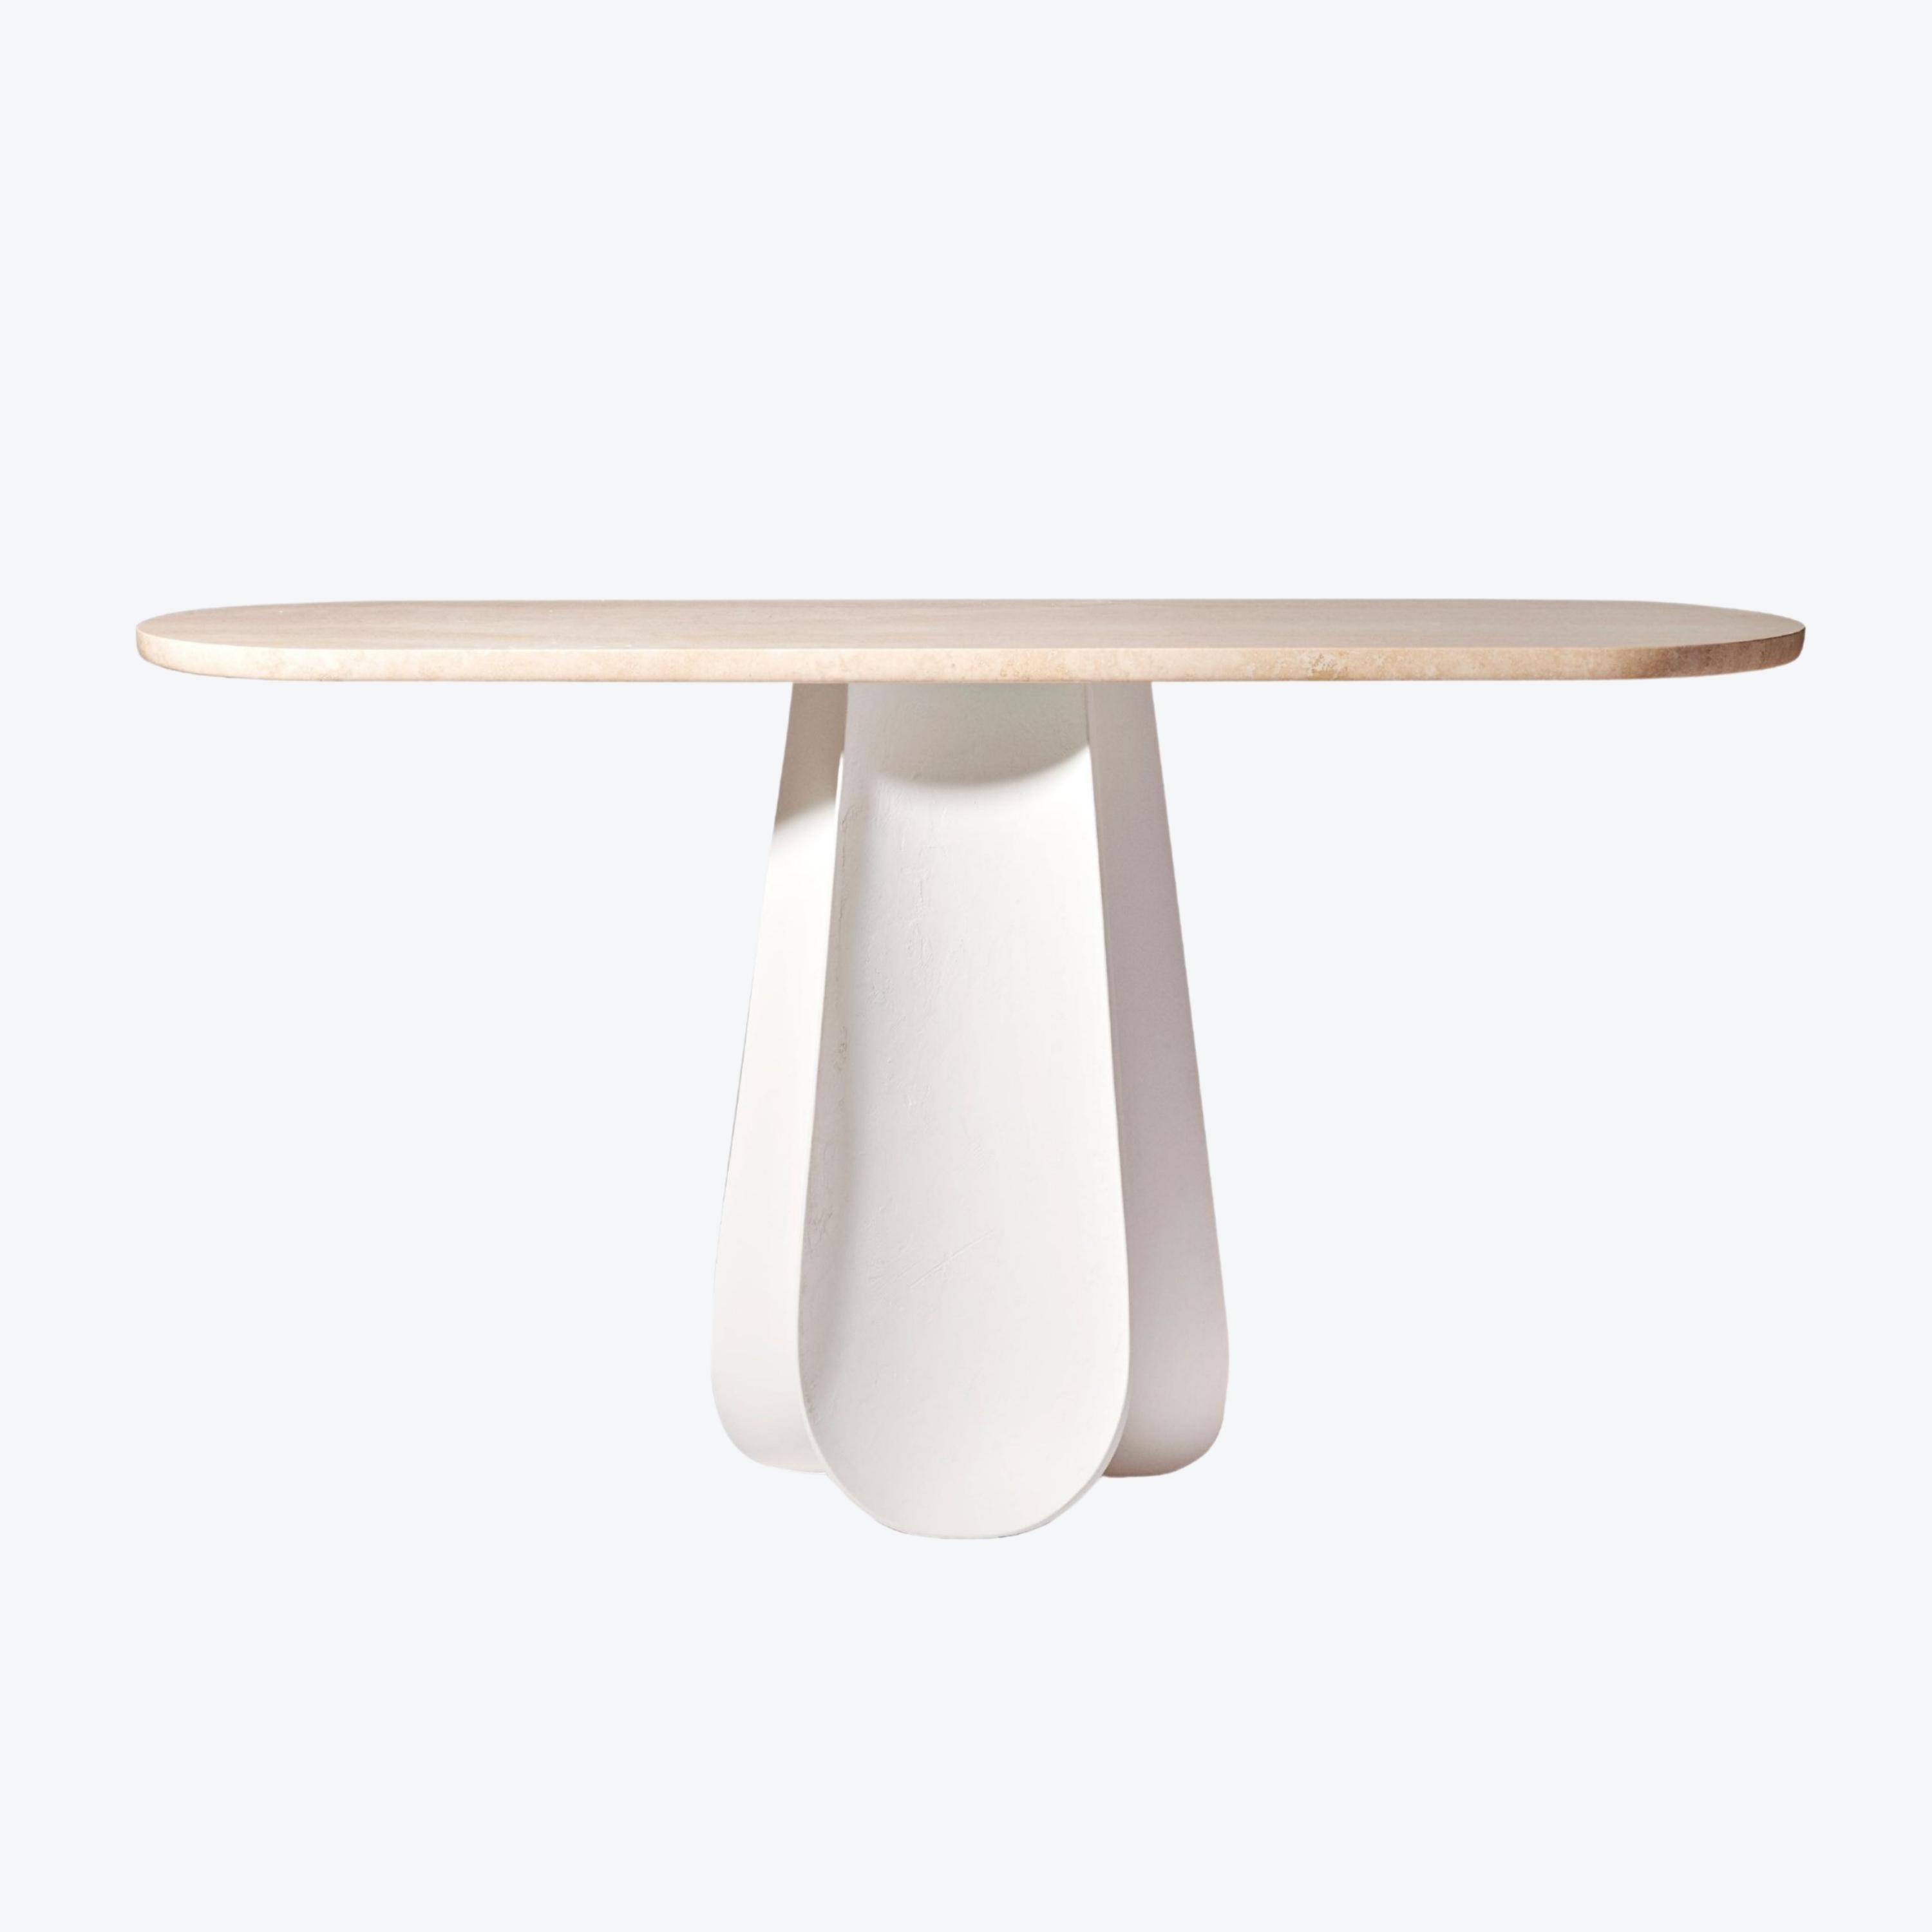 Smooth Wave Console Damien Langlois-Meurinne The Invisible Collection